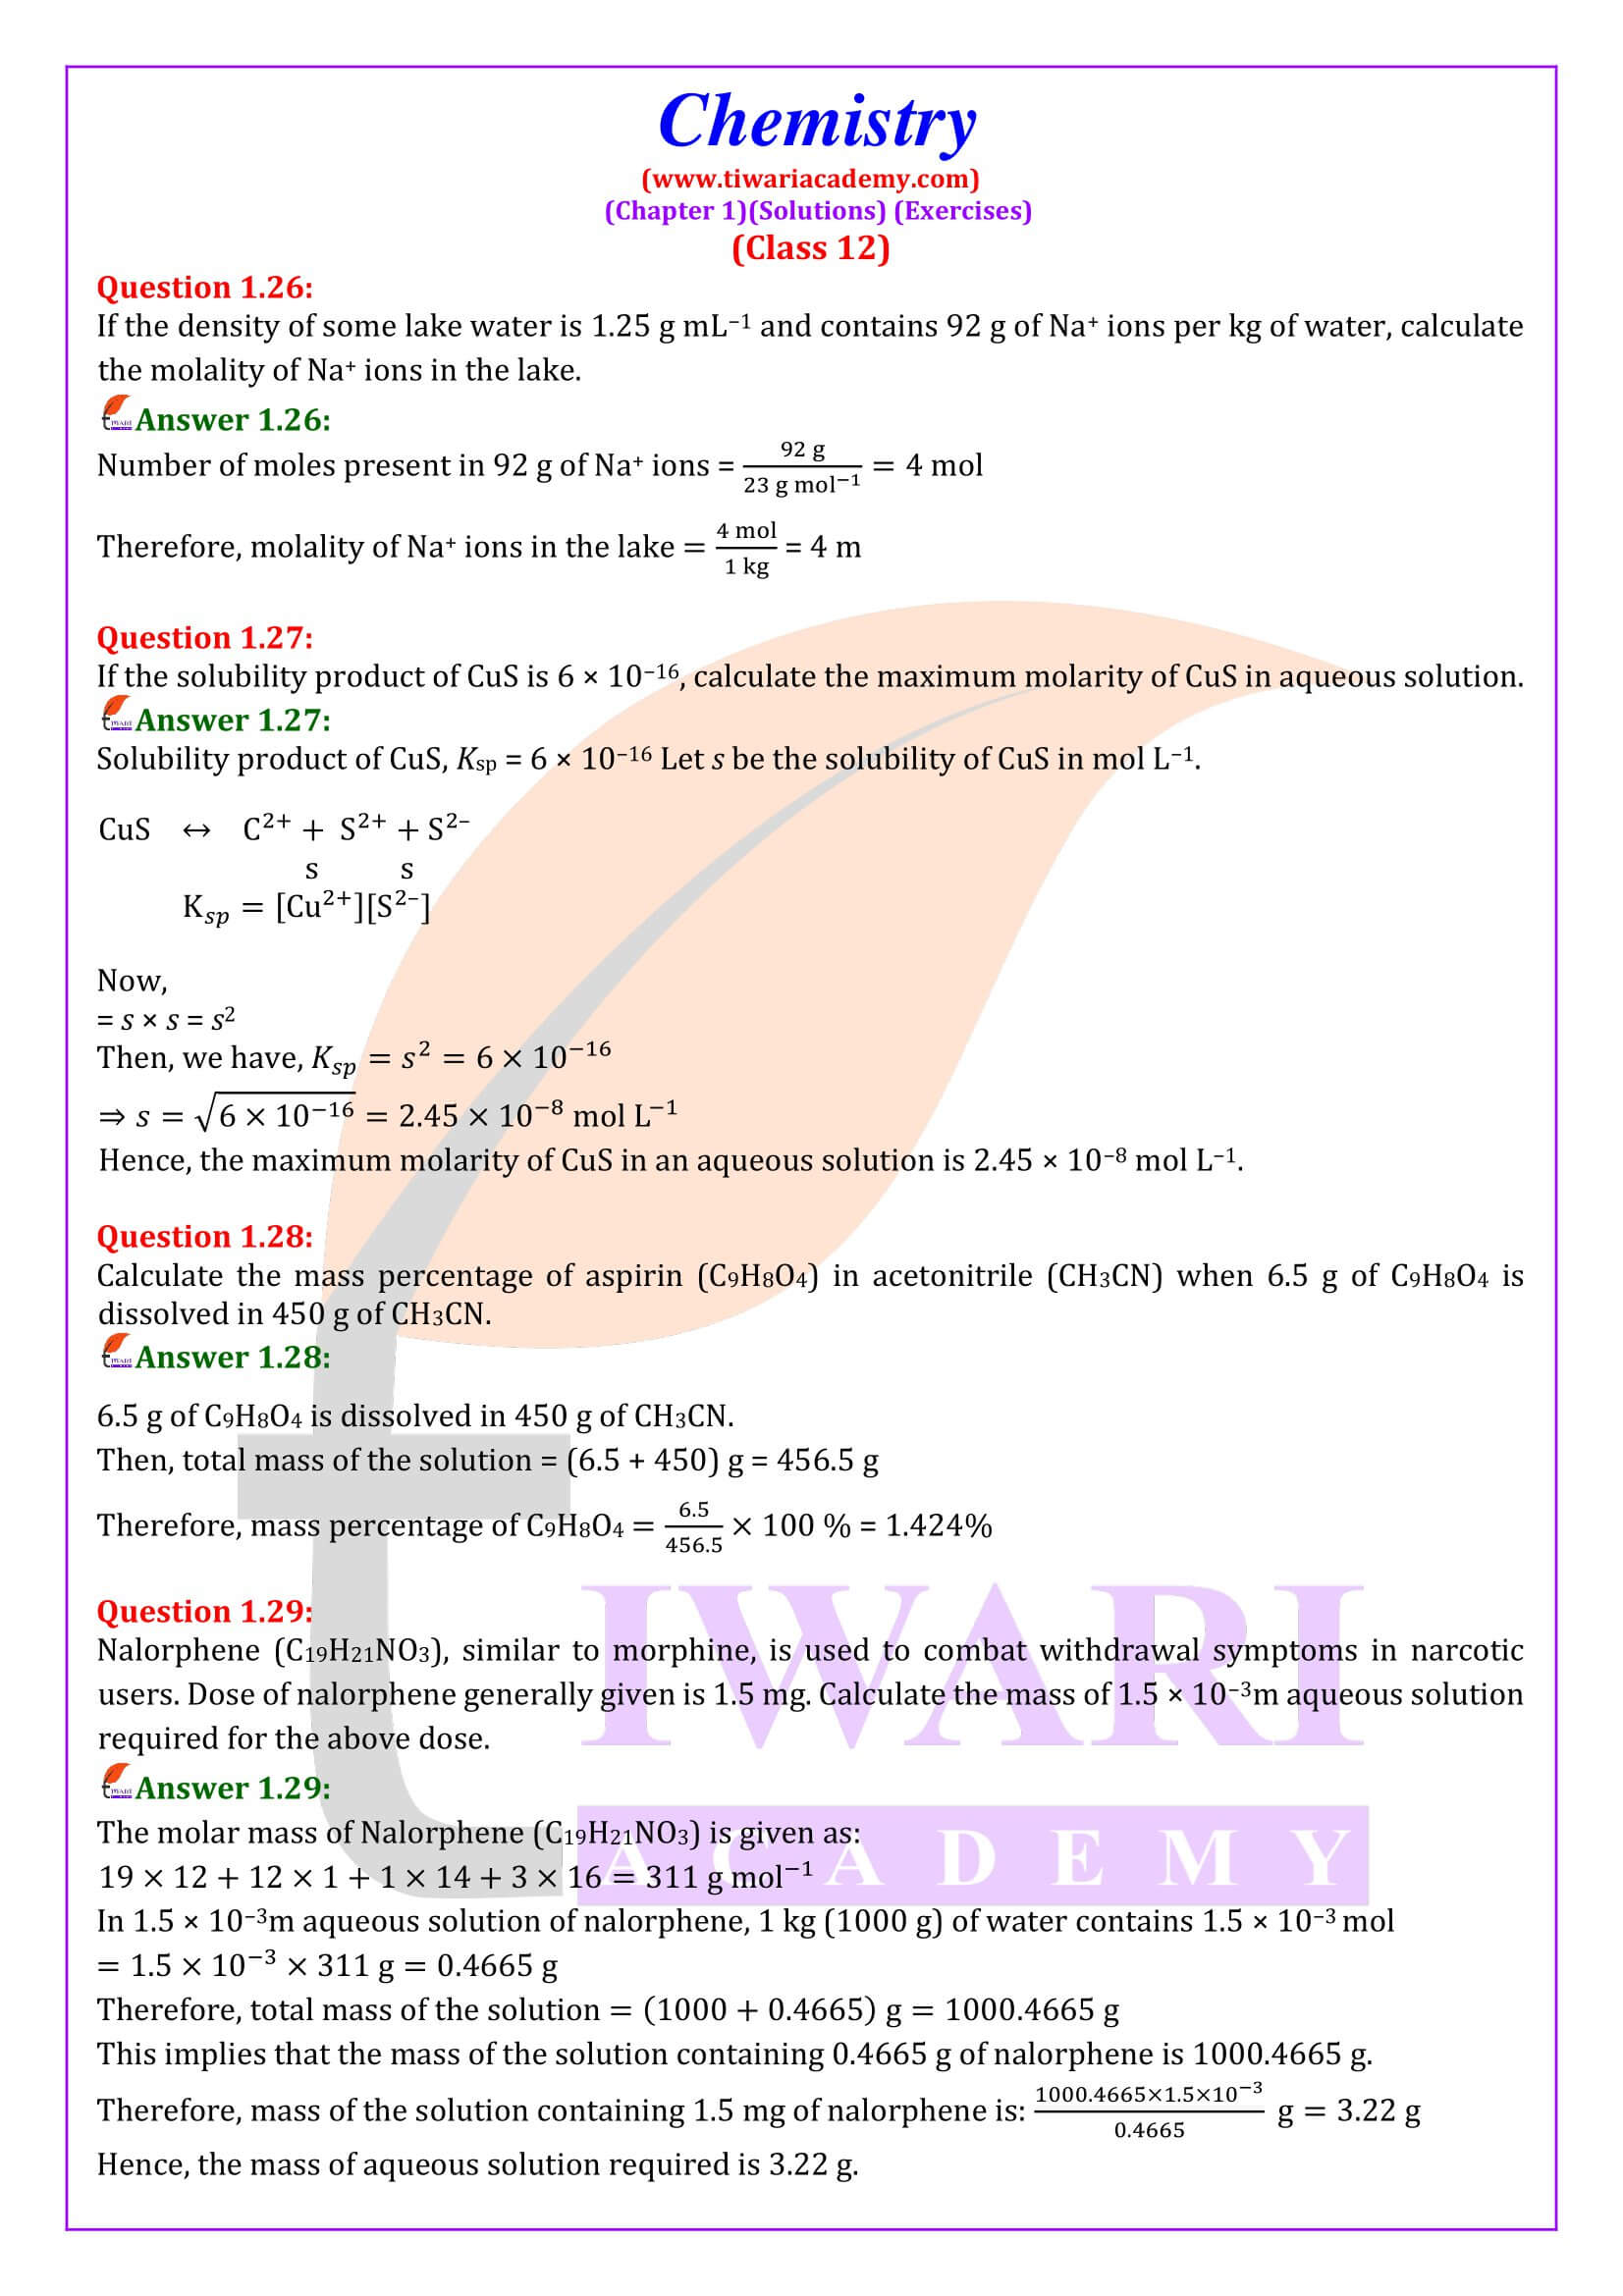 NCERT Solutions for Class 12 Chemistry Chapter 1 Exercises